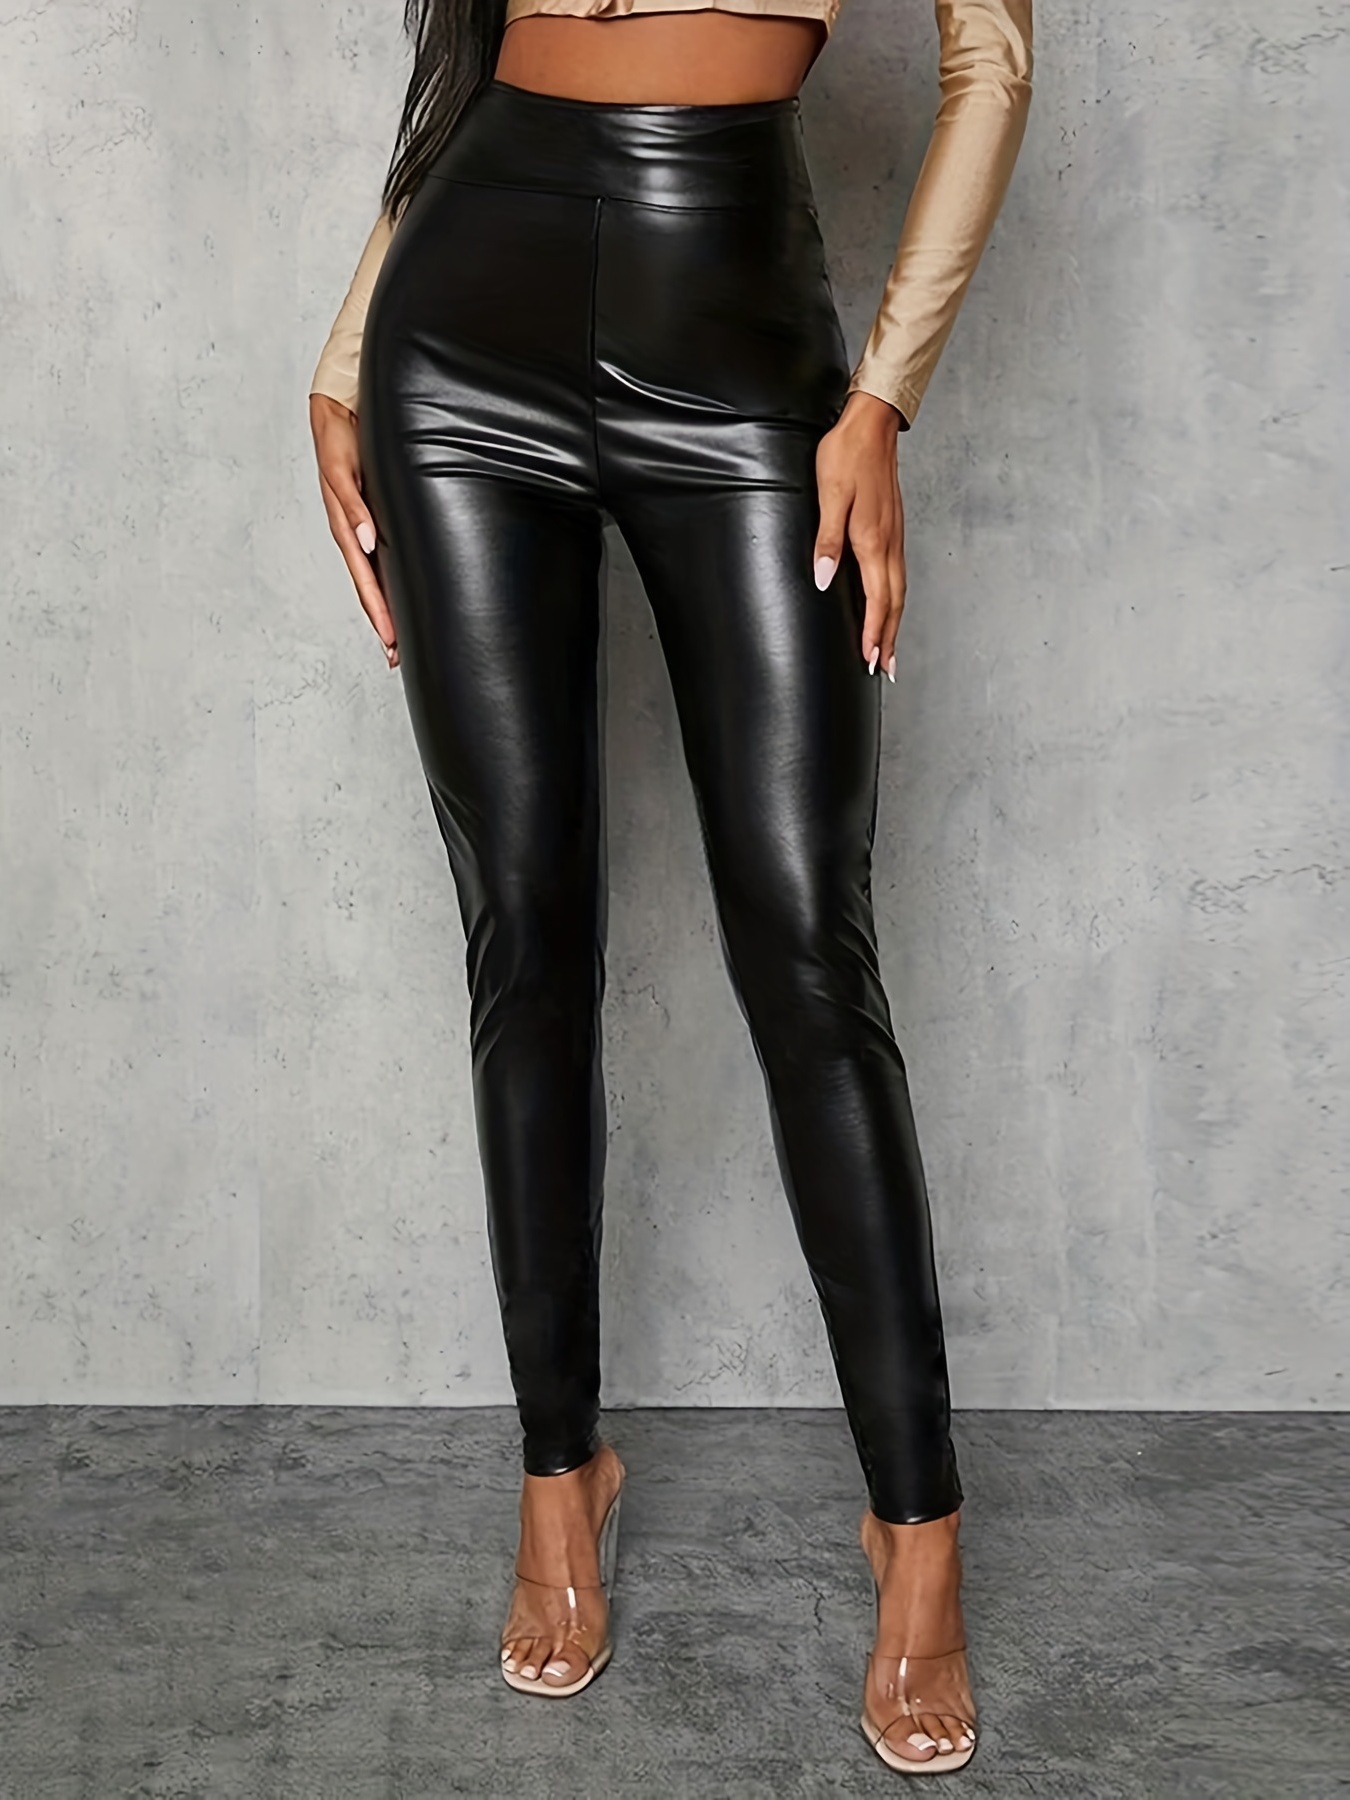 Women's Stretchy Faux Leather Leggings High Waist Front Seam